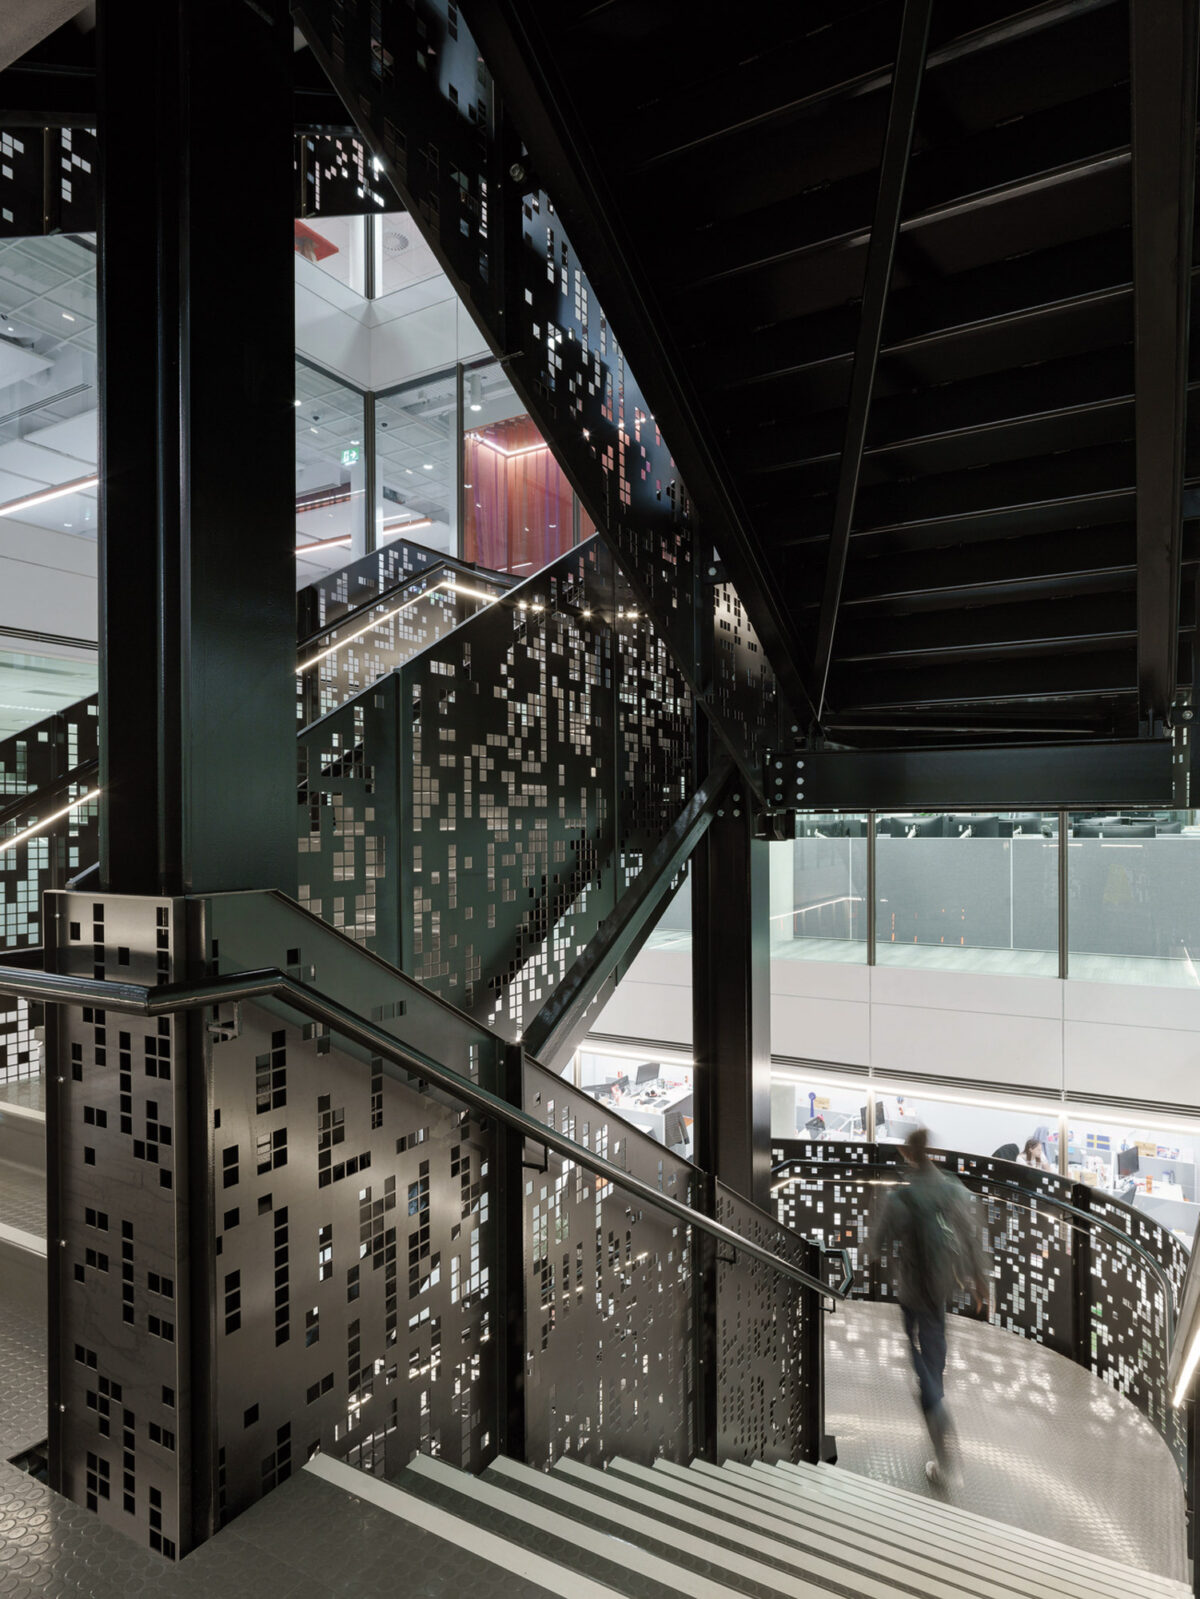 Modern staircase featuring perforated metal panels creating an urban geometric pattern. The ambient lighting accentuates the intricate shadows and highlights, contributing to the dynamic and contemporary aesthetic of the architectural space.